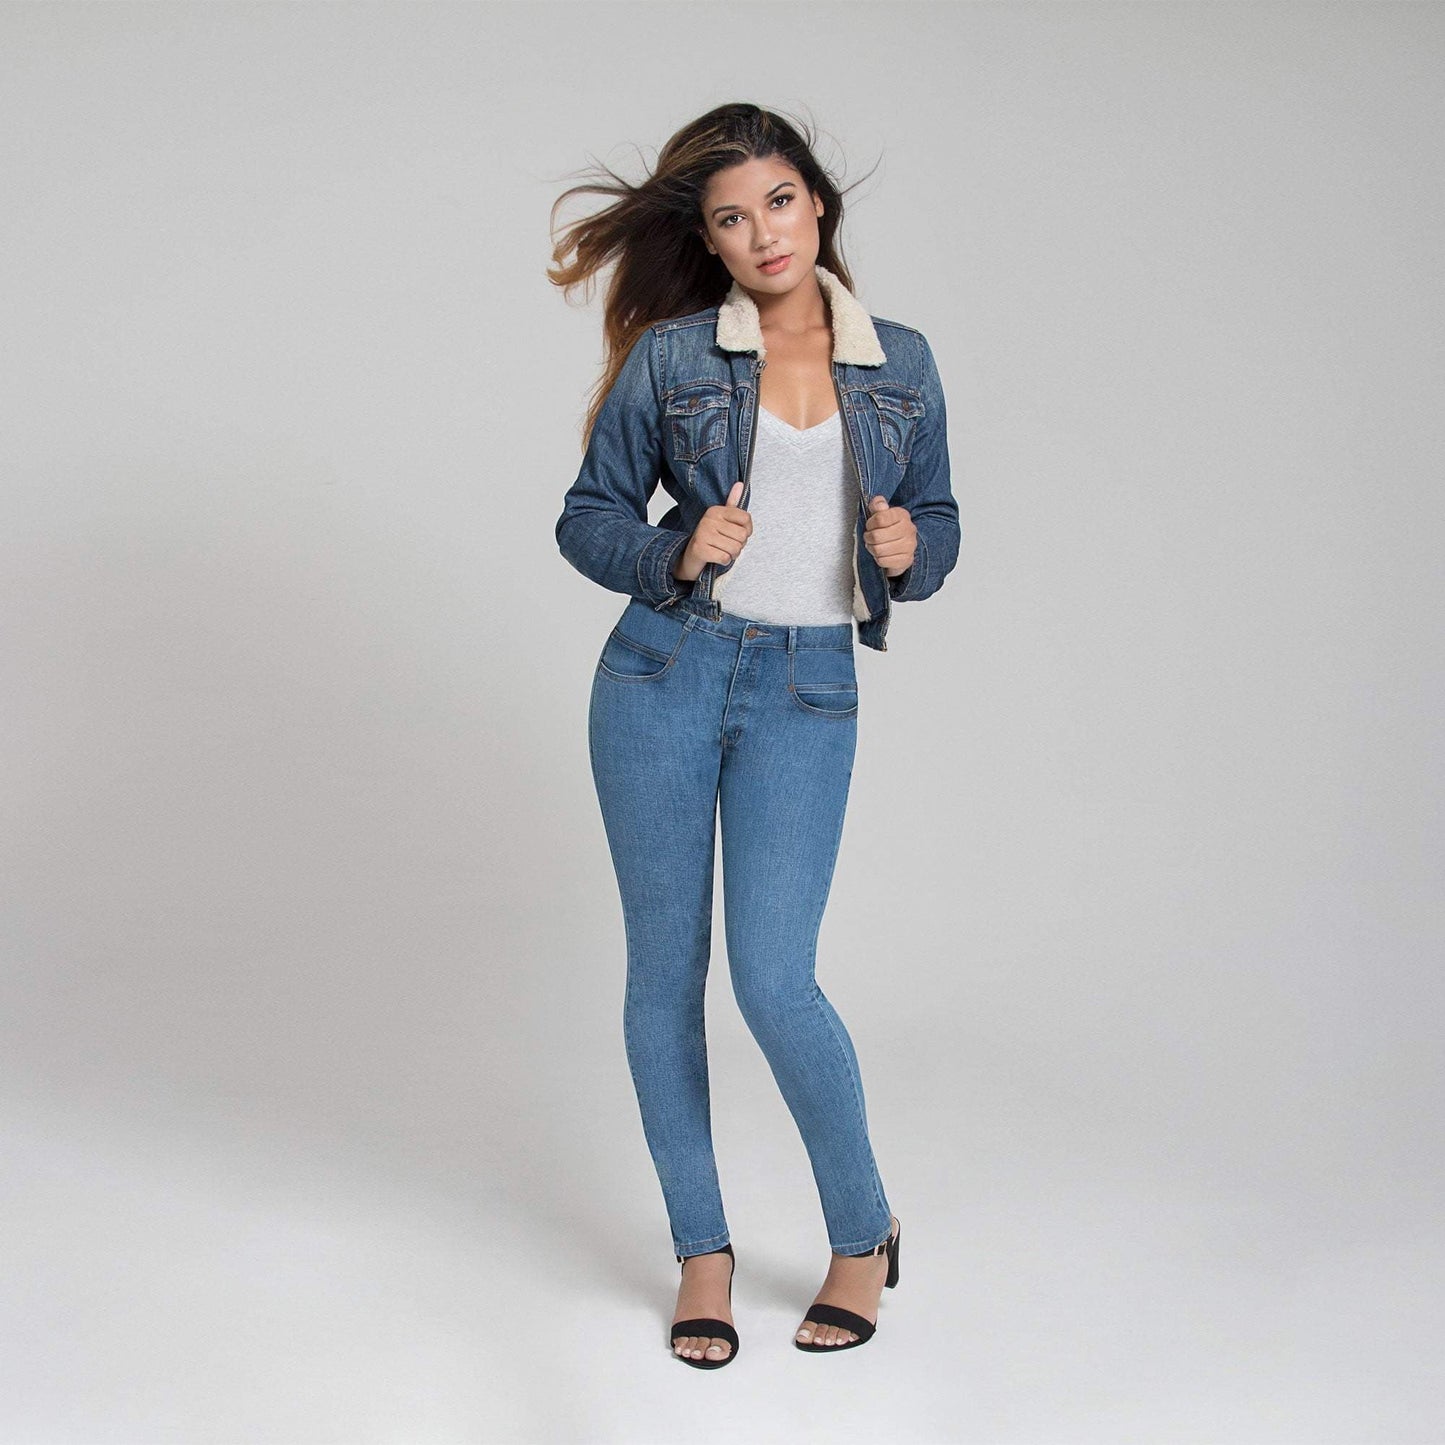 Feminine jeans with deep pockets: Shop styles from Radian, Levi's and more  - Reviewed